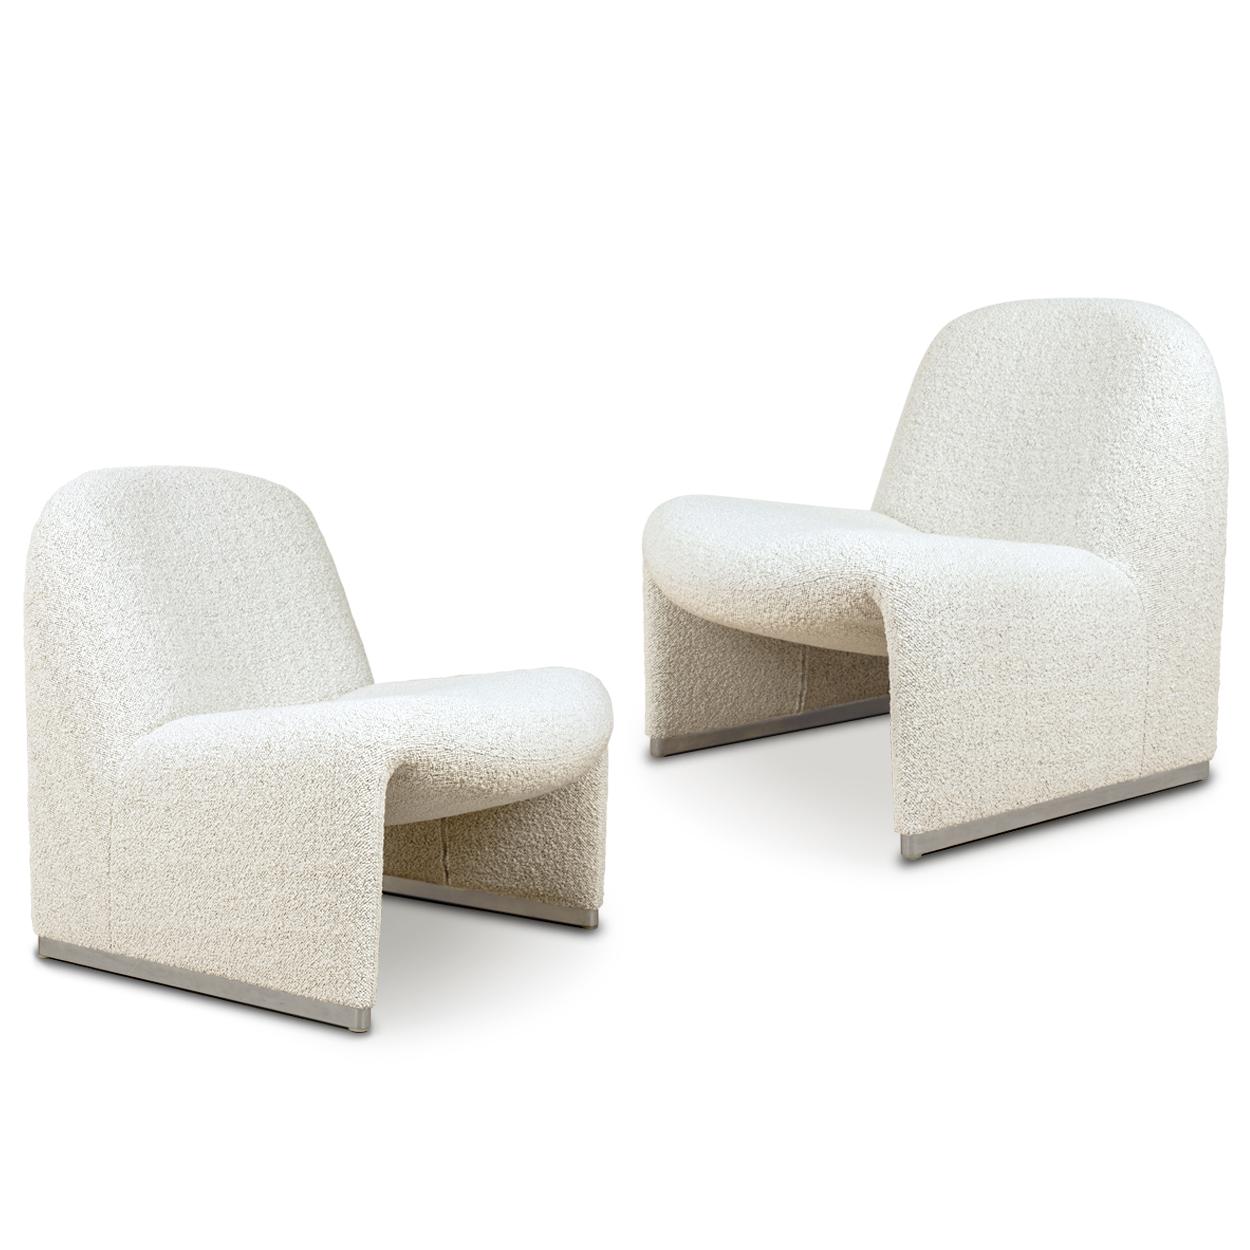 Giancarlo Piretti designed lounge “Alky” chairs newly upholstered in a high-end Bouclé fabric Karakorum 007 DEDAR Aluminum frame and polished chrome foot rests. Beautiful organic curves reminiscent of Pierre Paulin designs. Produced by Castelli,